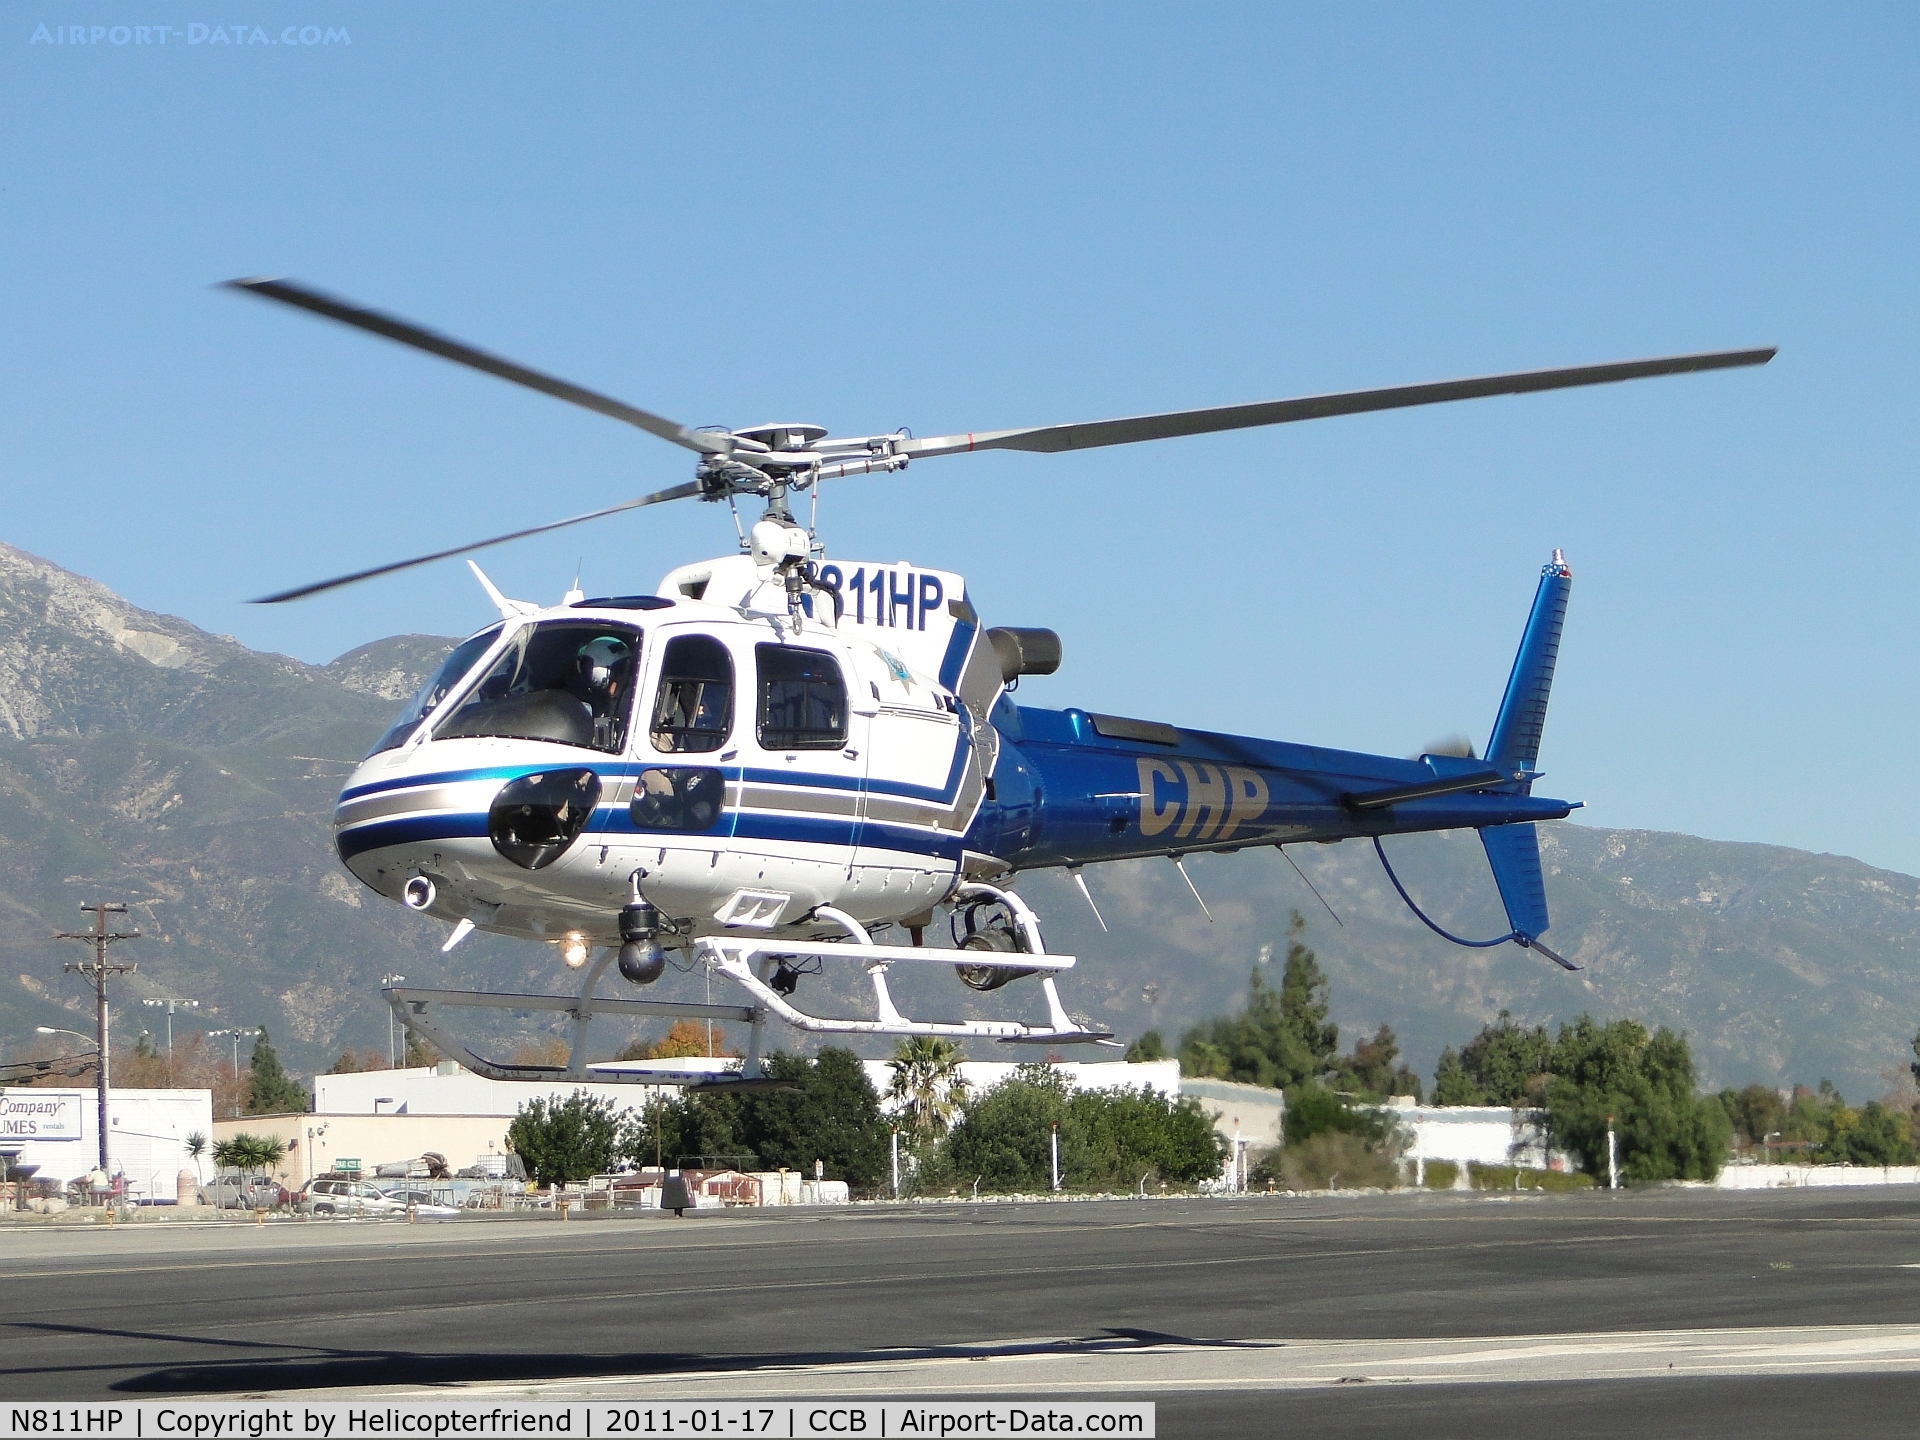 N811HP, 2001 Eurocopter AS-350B-3 Ecureuil Ecureuil C/N 3404, Cessna CHP pilot on board and lifting off